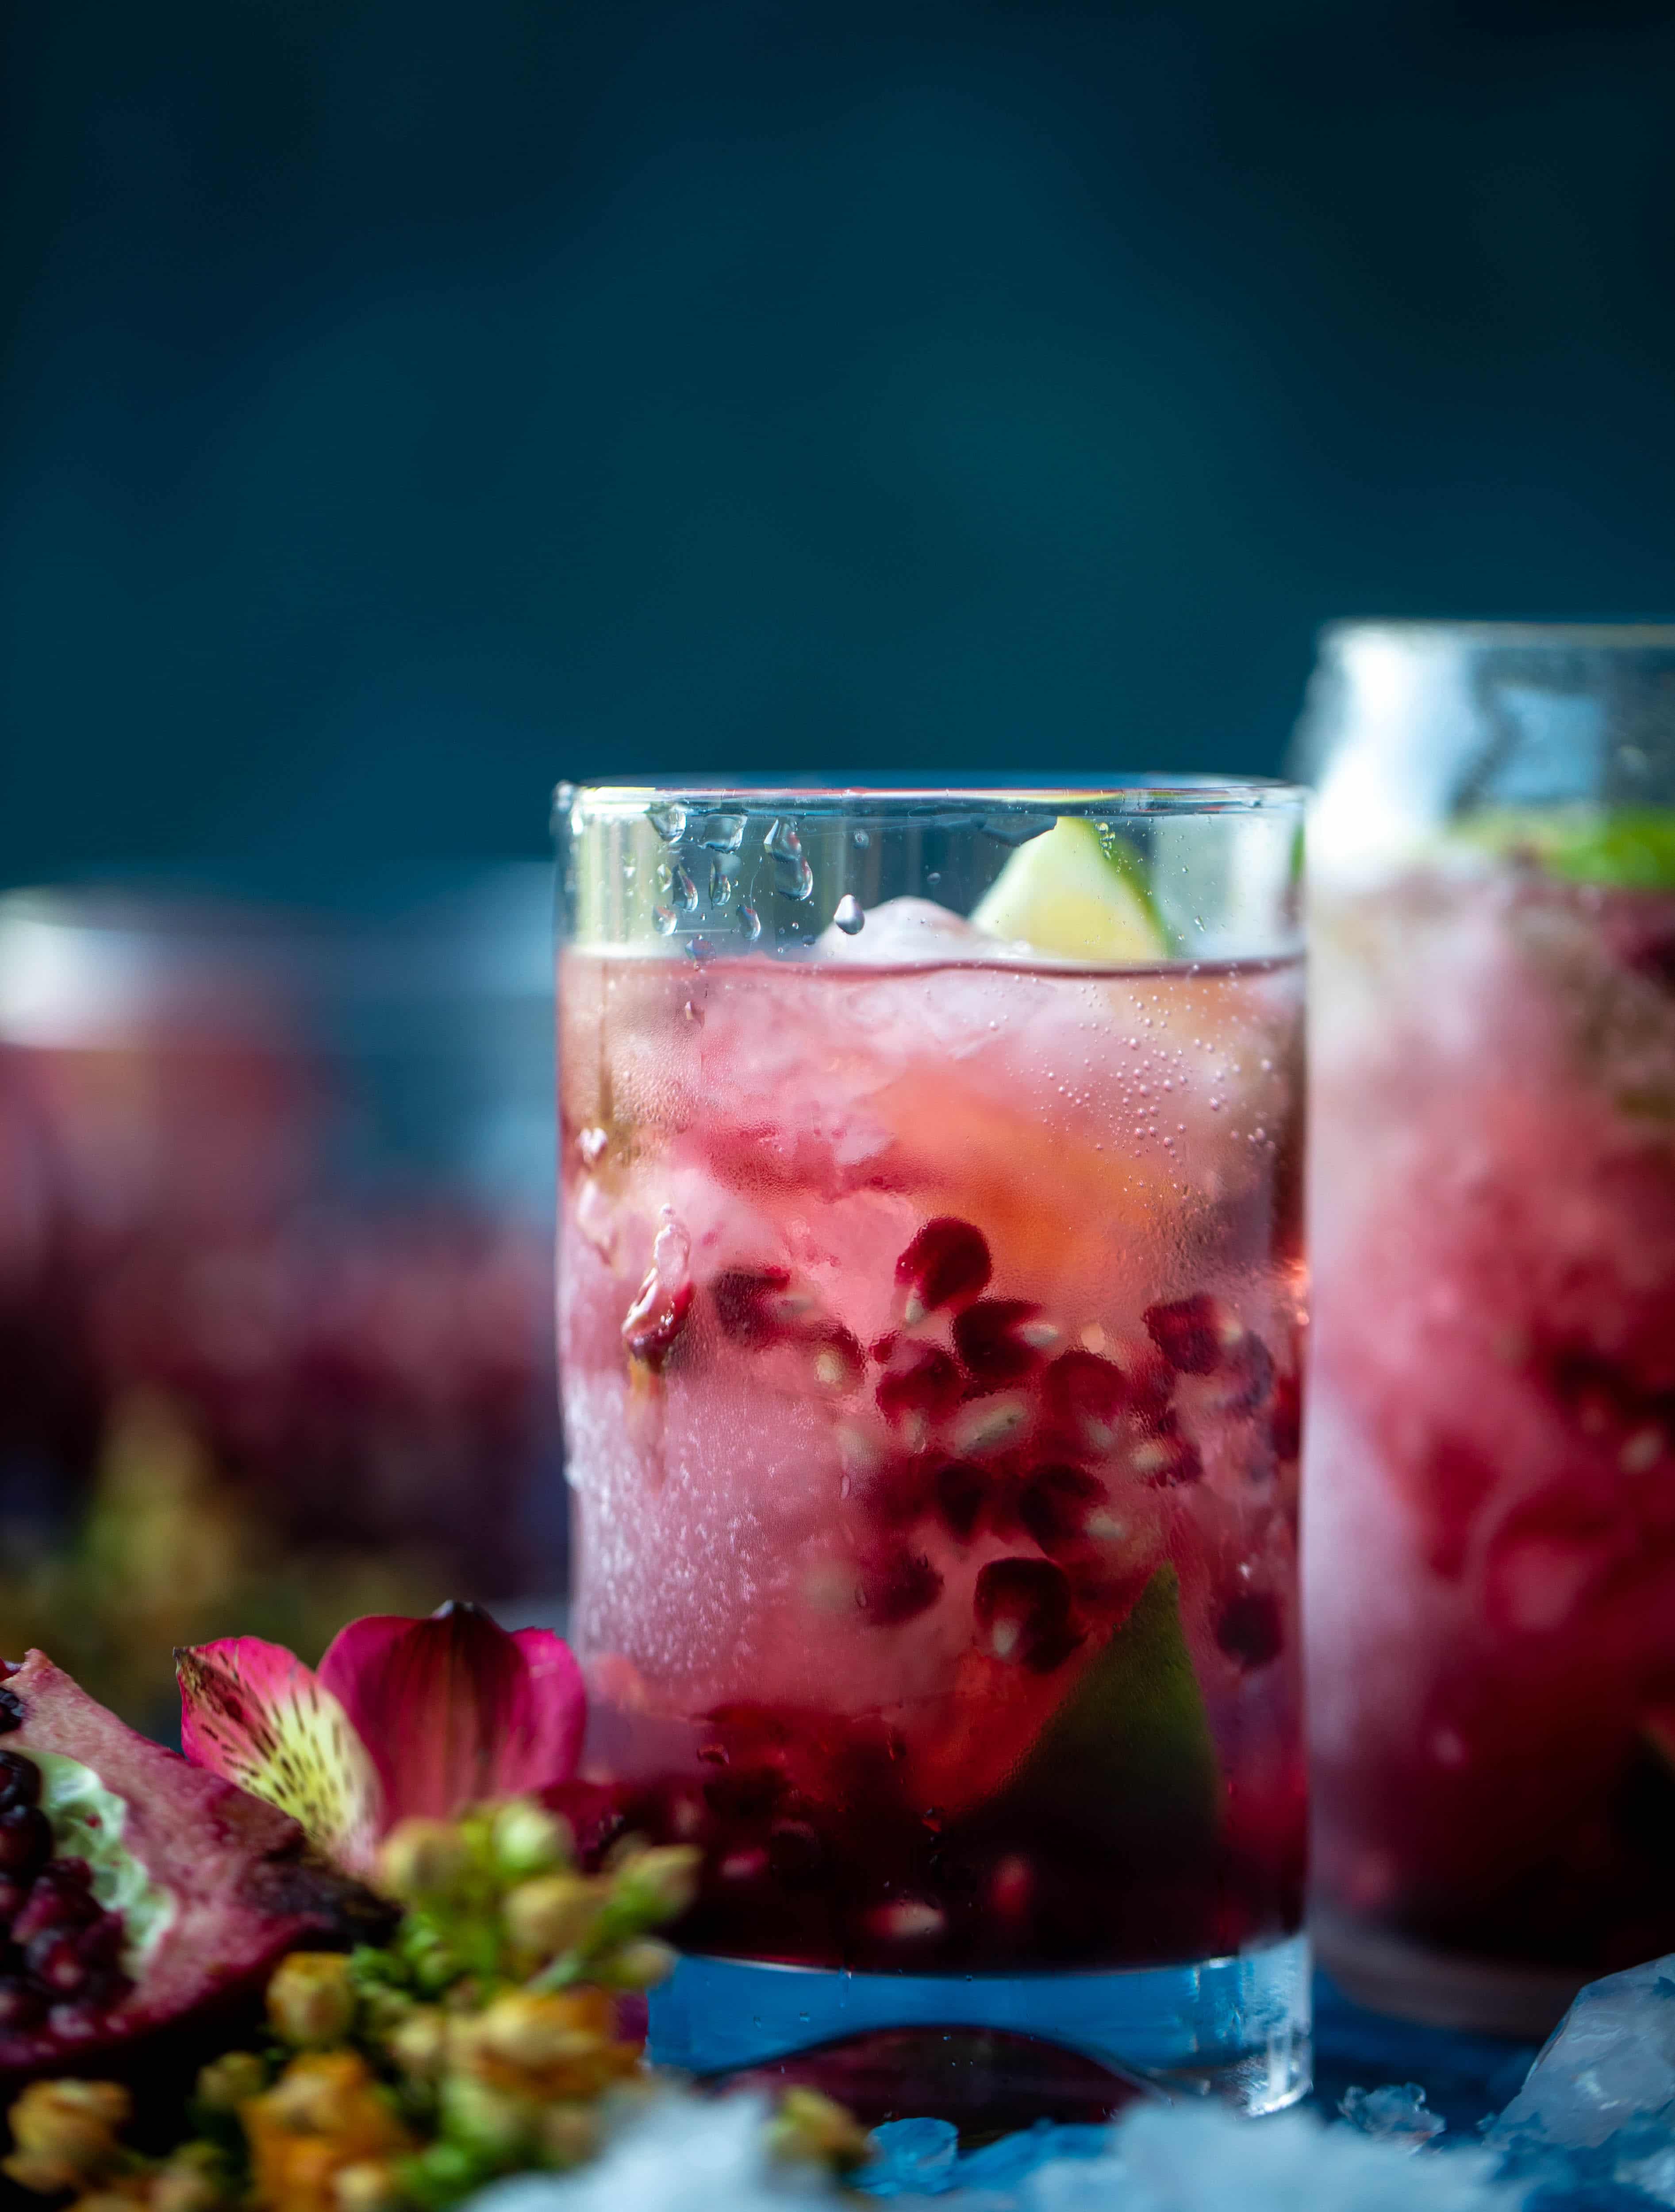 This pomegranate gin and tonic is the best way to transition your cocktail party life from the hot weather into fall! Tastes delish and looks pretty too!